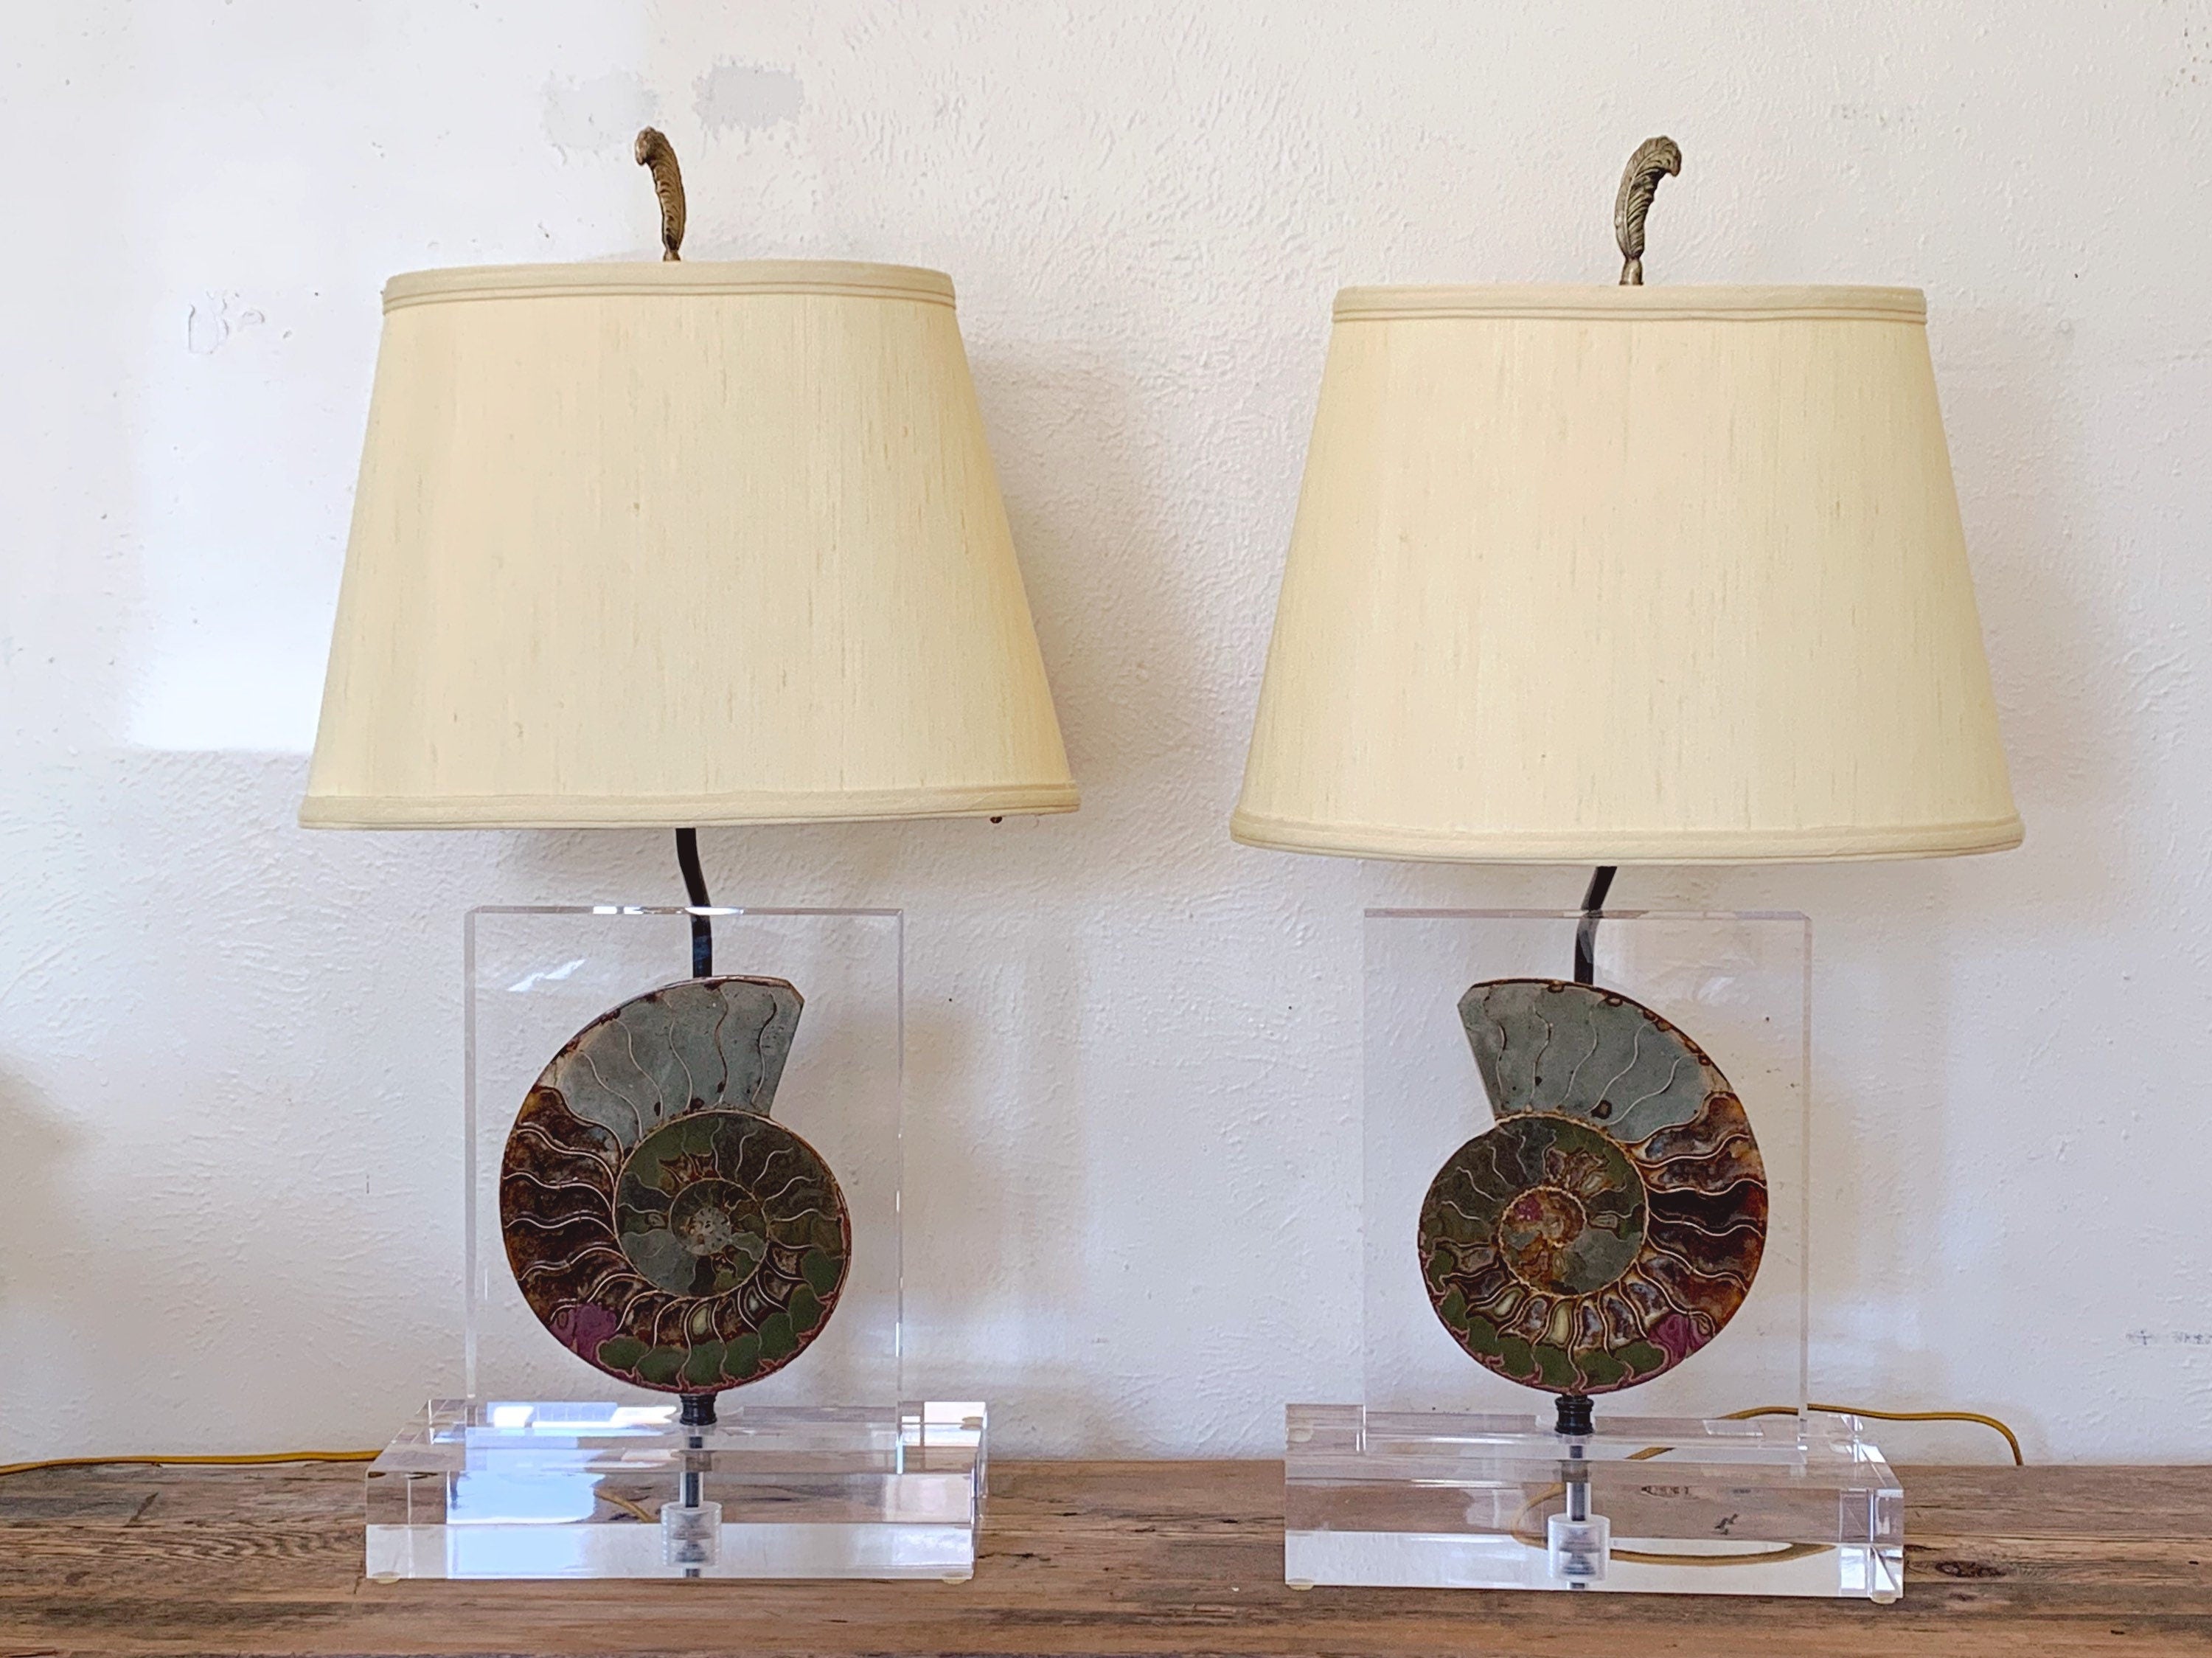 Pair of Vintage Mounted Ammonite Lucite Table Lamps | 1970s Geometric –  Urban Nomad NYC